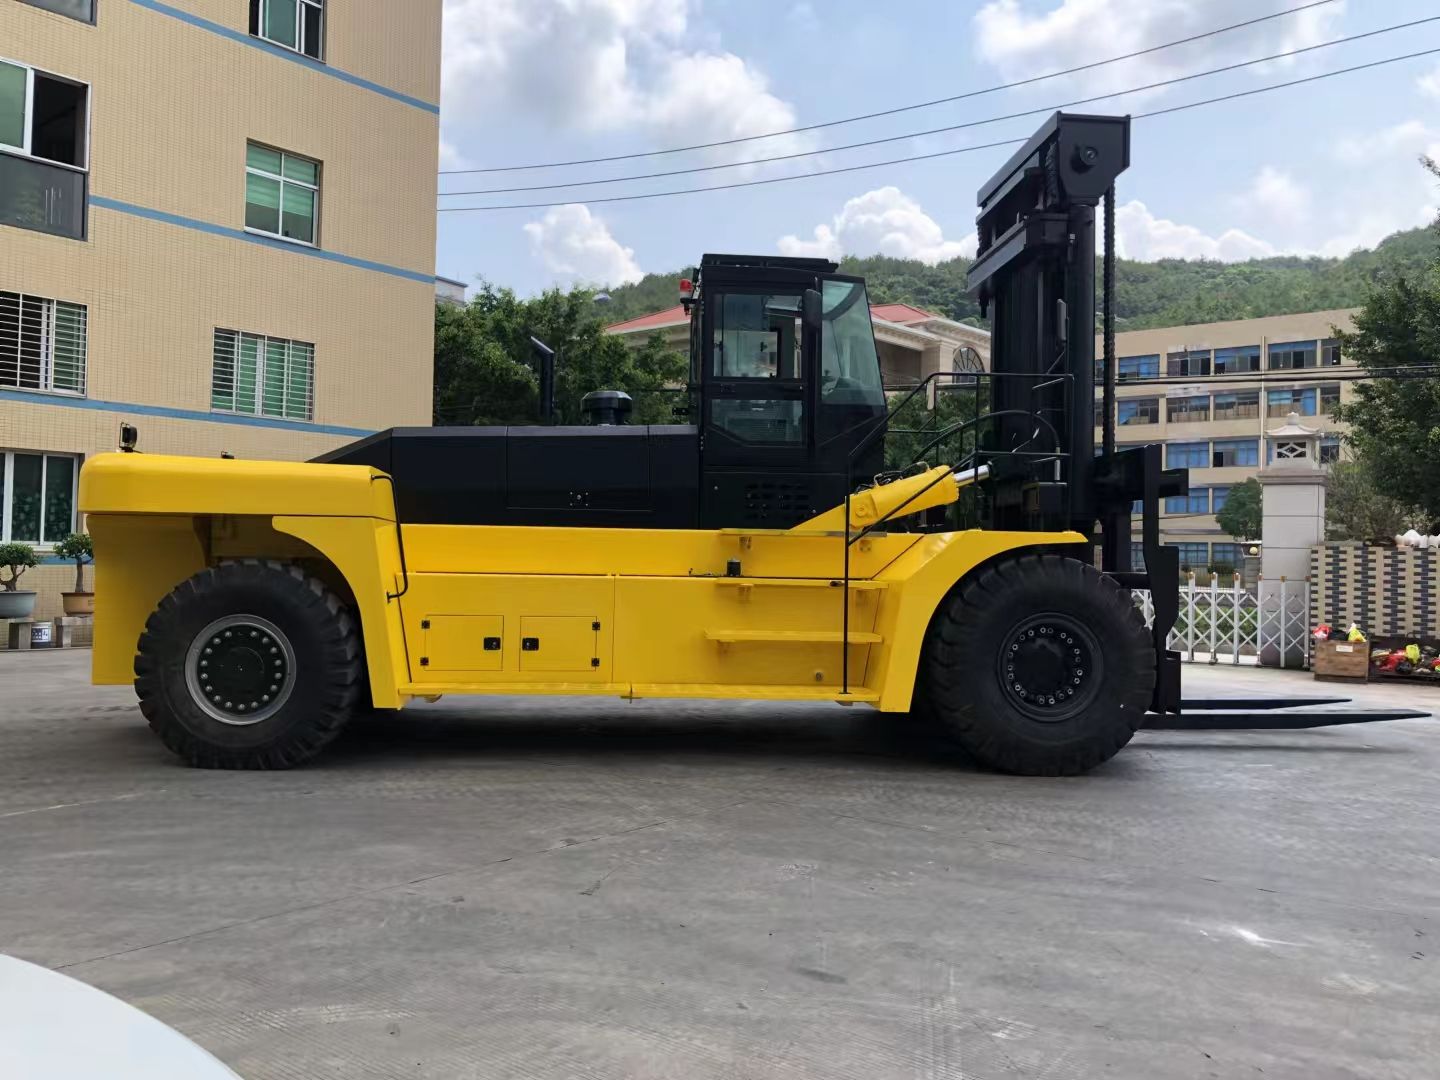 40 ton container diesel forklift